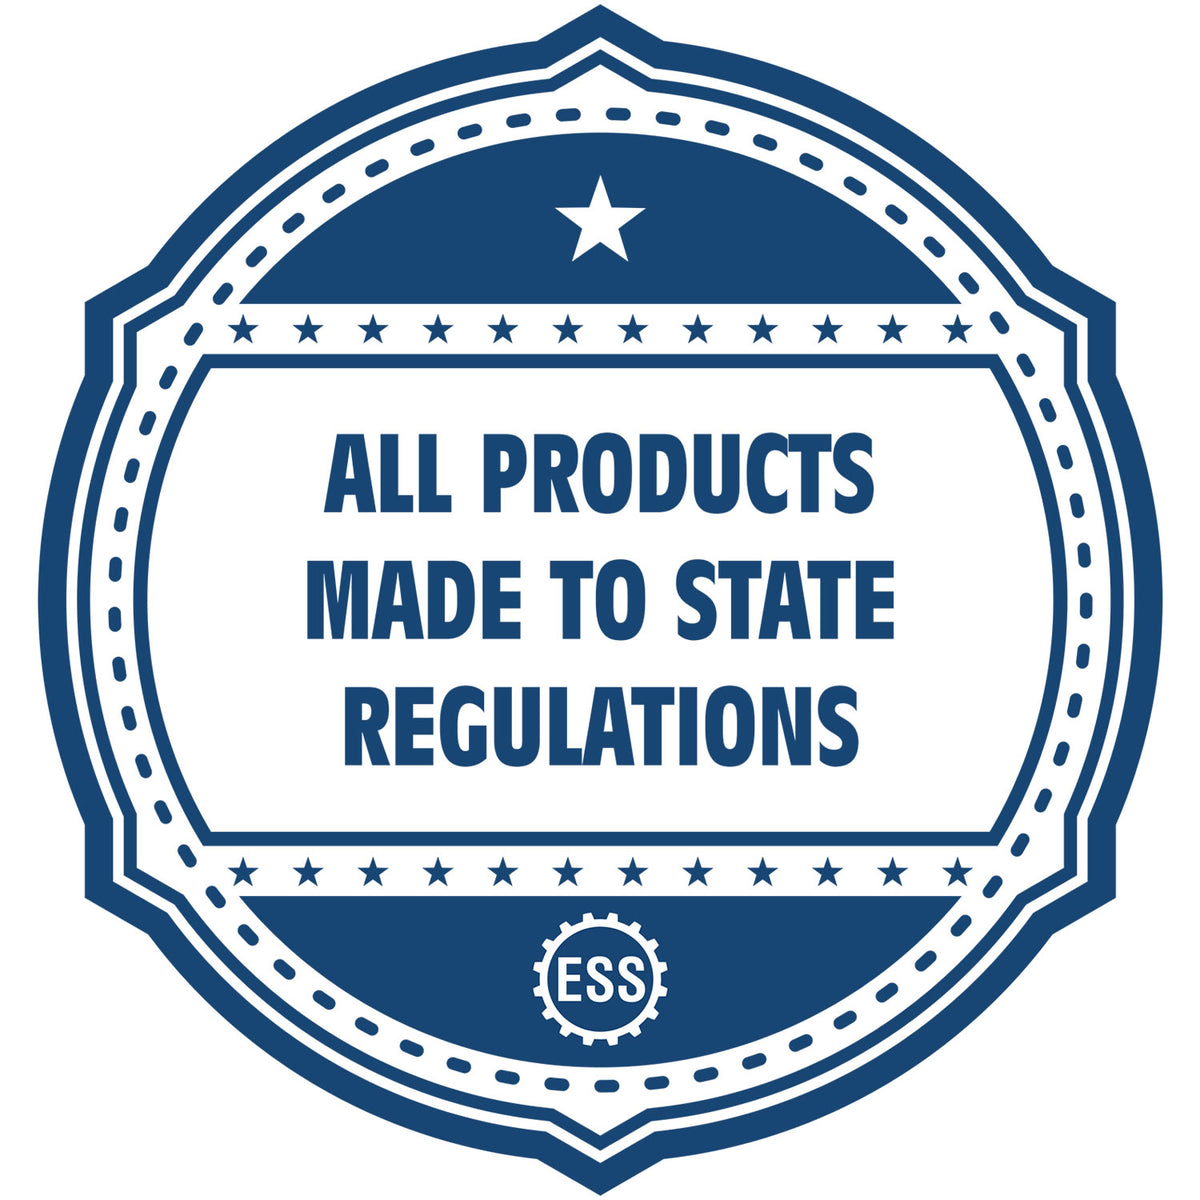 An icon or badge element for the PSI Maine Notary Stamp showing that this product is made in compliance with state regulations.